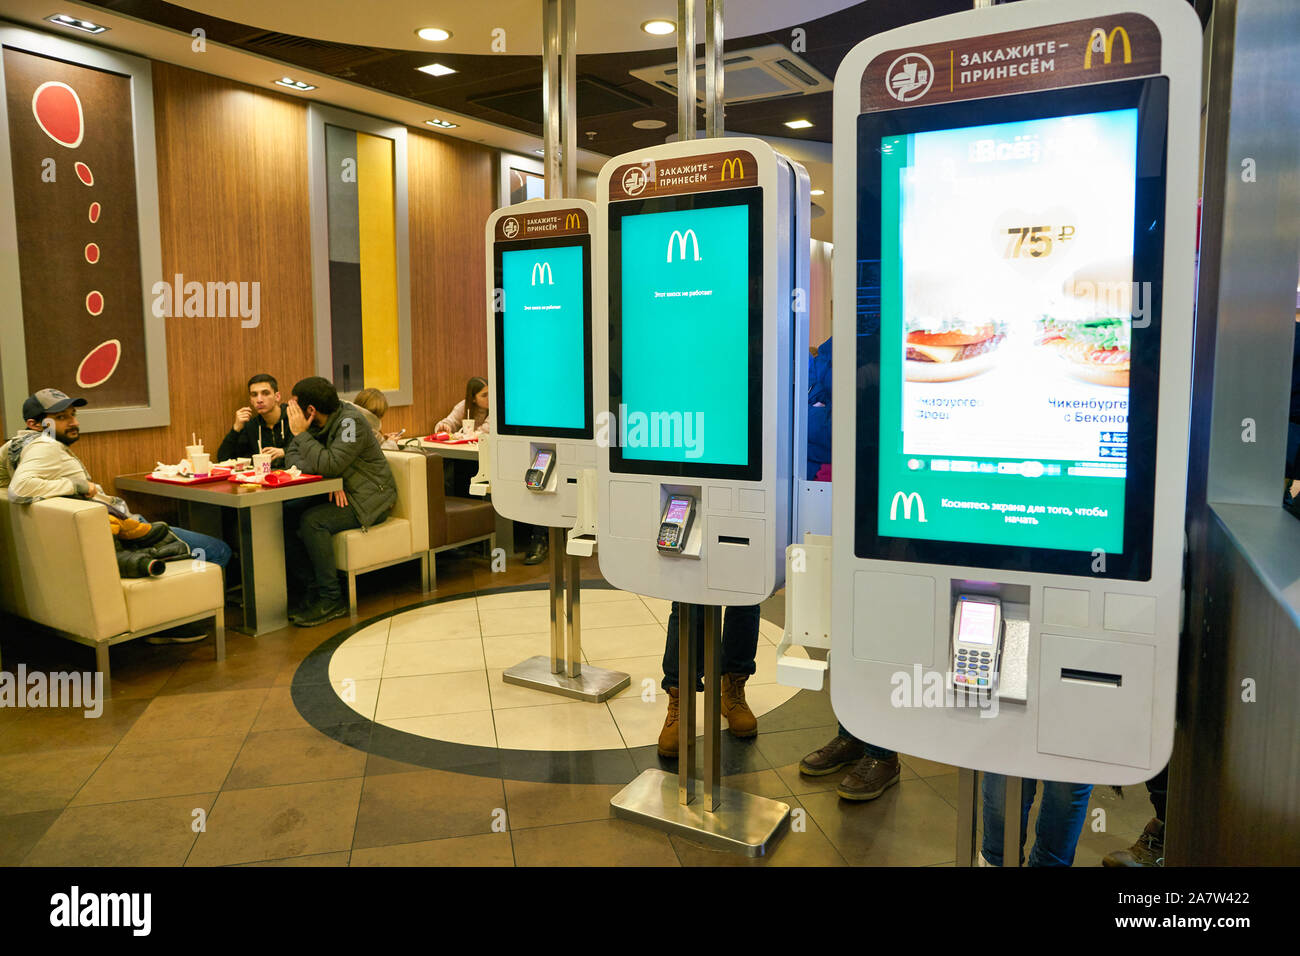 MOSCOW, RUSSIA - CIRCA JANUARY, 2019: self ordering kiosk at McDonald's restaurant in Moscow. Stock Photo